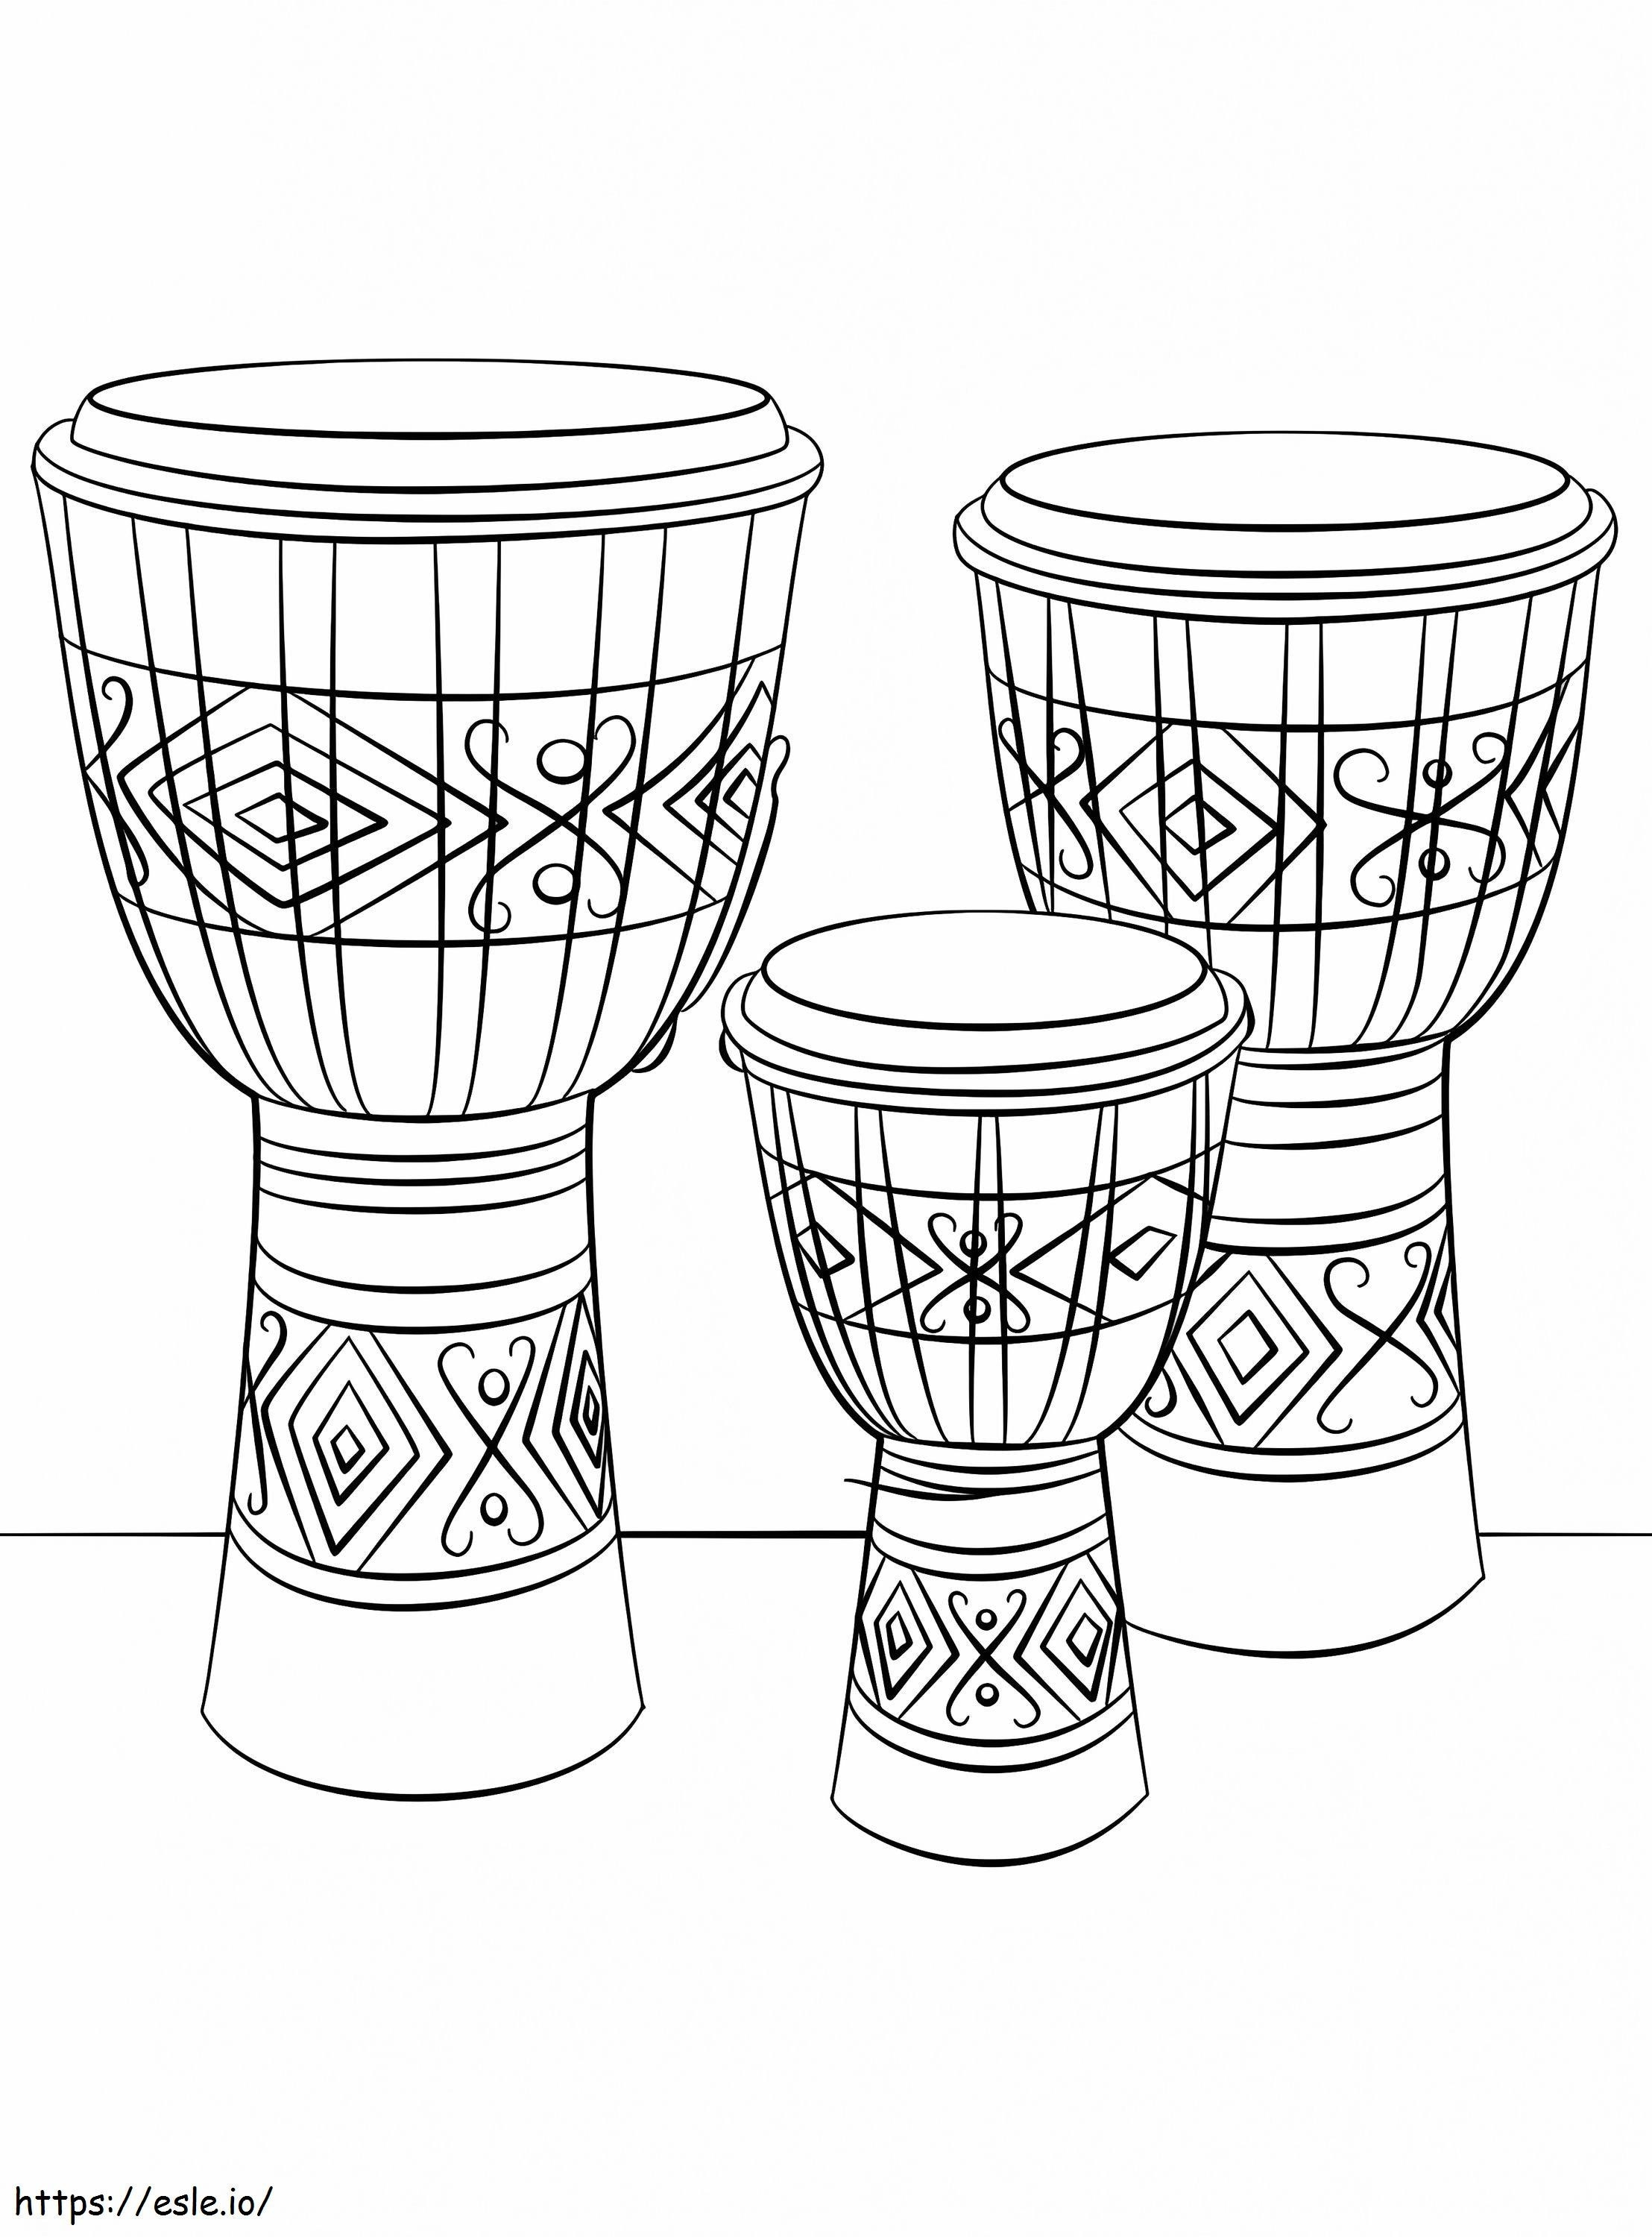 Three Djembe coloring page